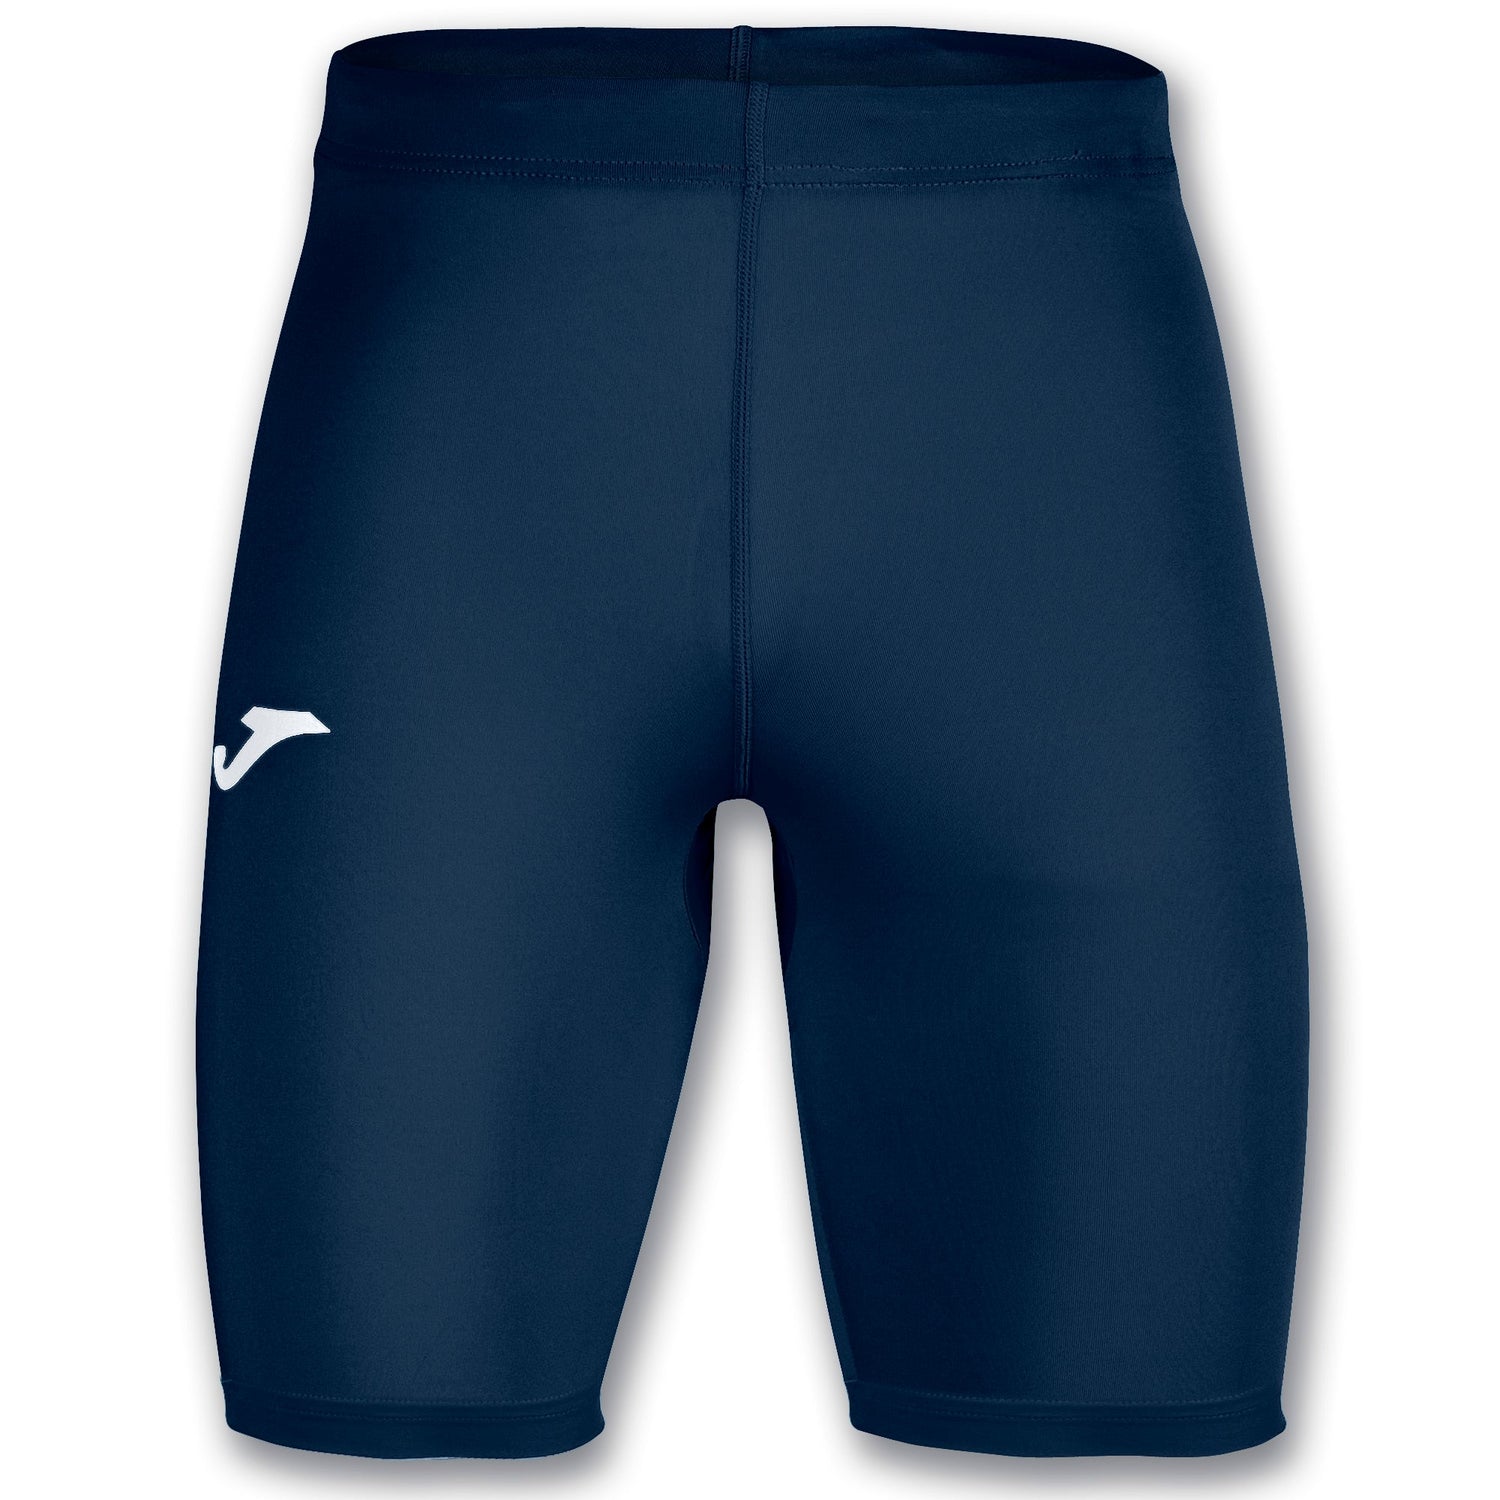 Joma Brama Baselayer Short, available in Joma Canada Store. Joma is shipping in Canada. For club offers contact us.